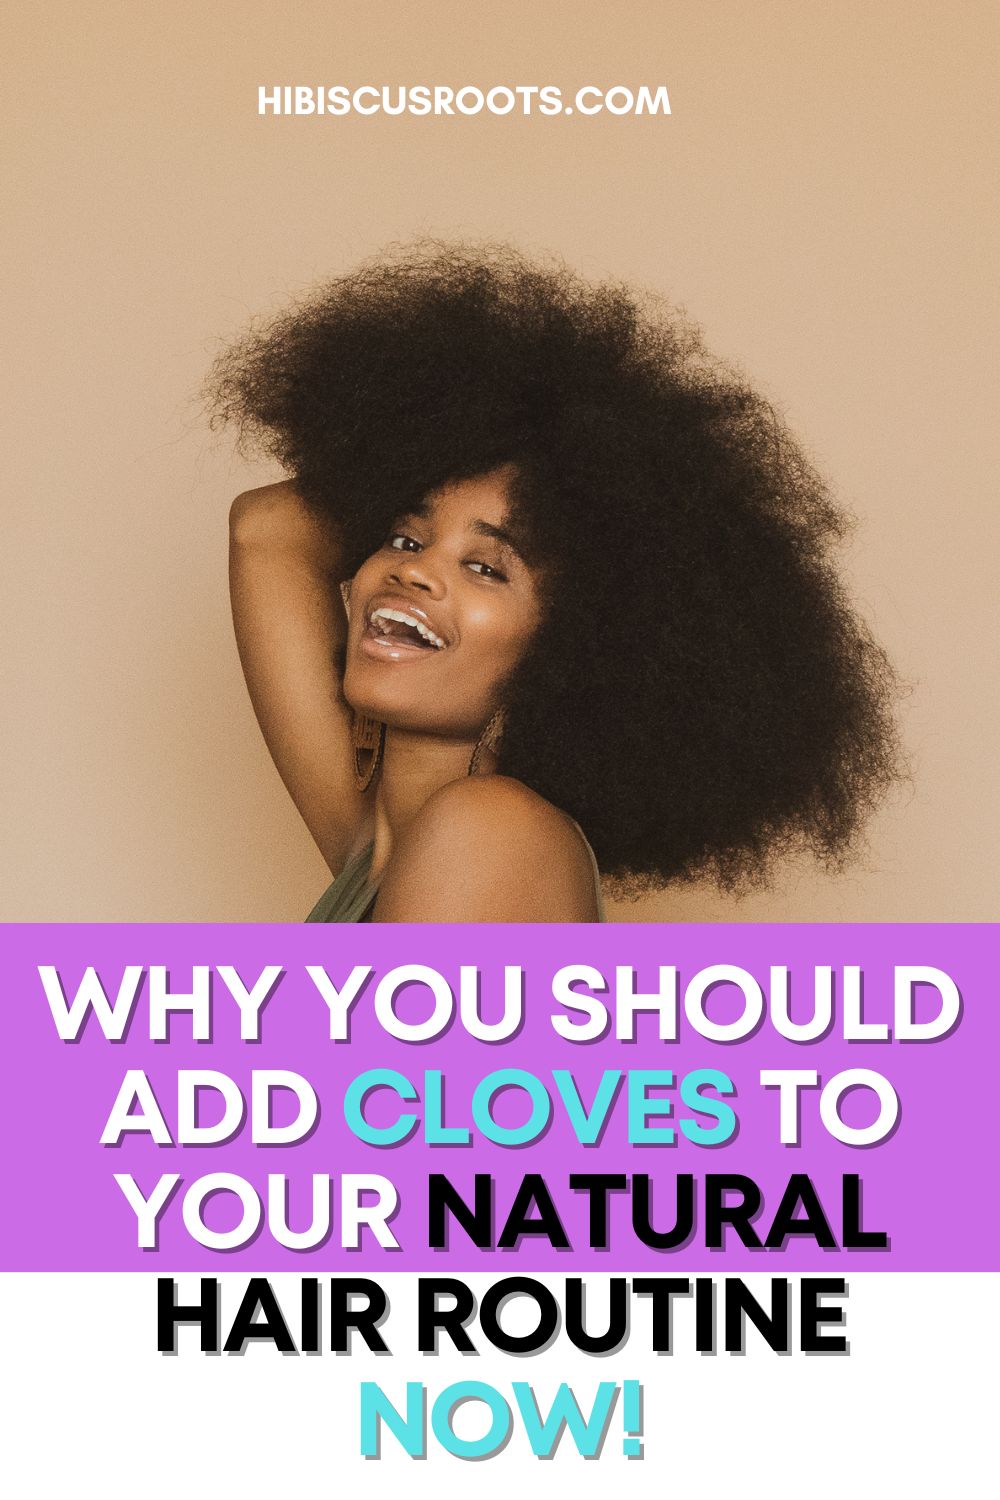 Cloves for Natural Hair Growth: DEBUNKED!